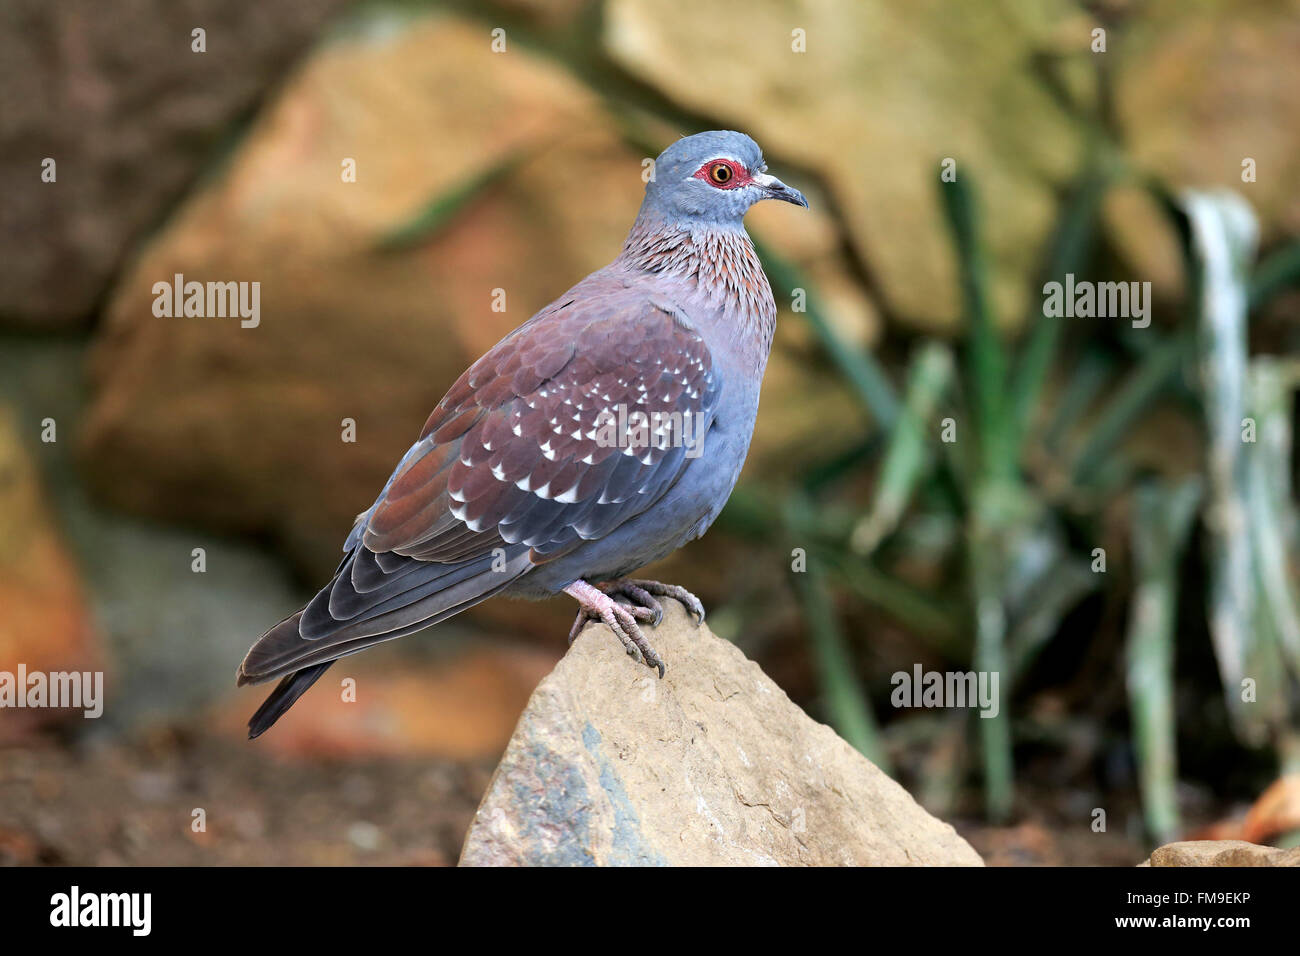 Rock Pigeon, Speckled pigeon, adult on rock, Simonstown, Western Cape, South Africa, Africa / (Columba guinea) Stock Photo